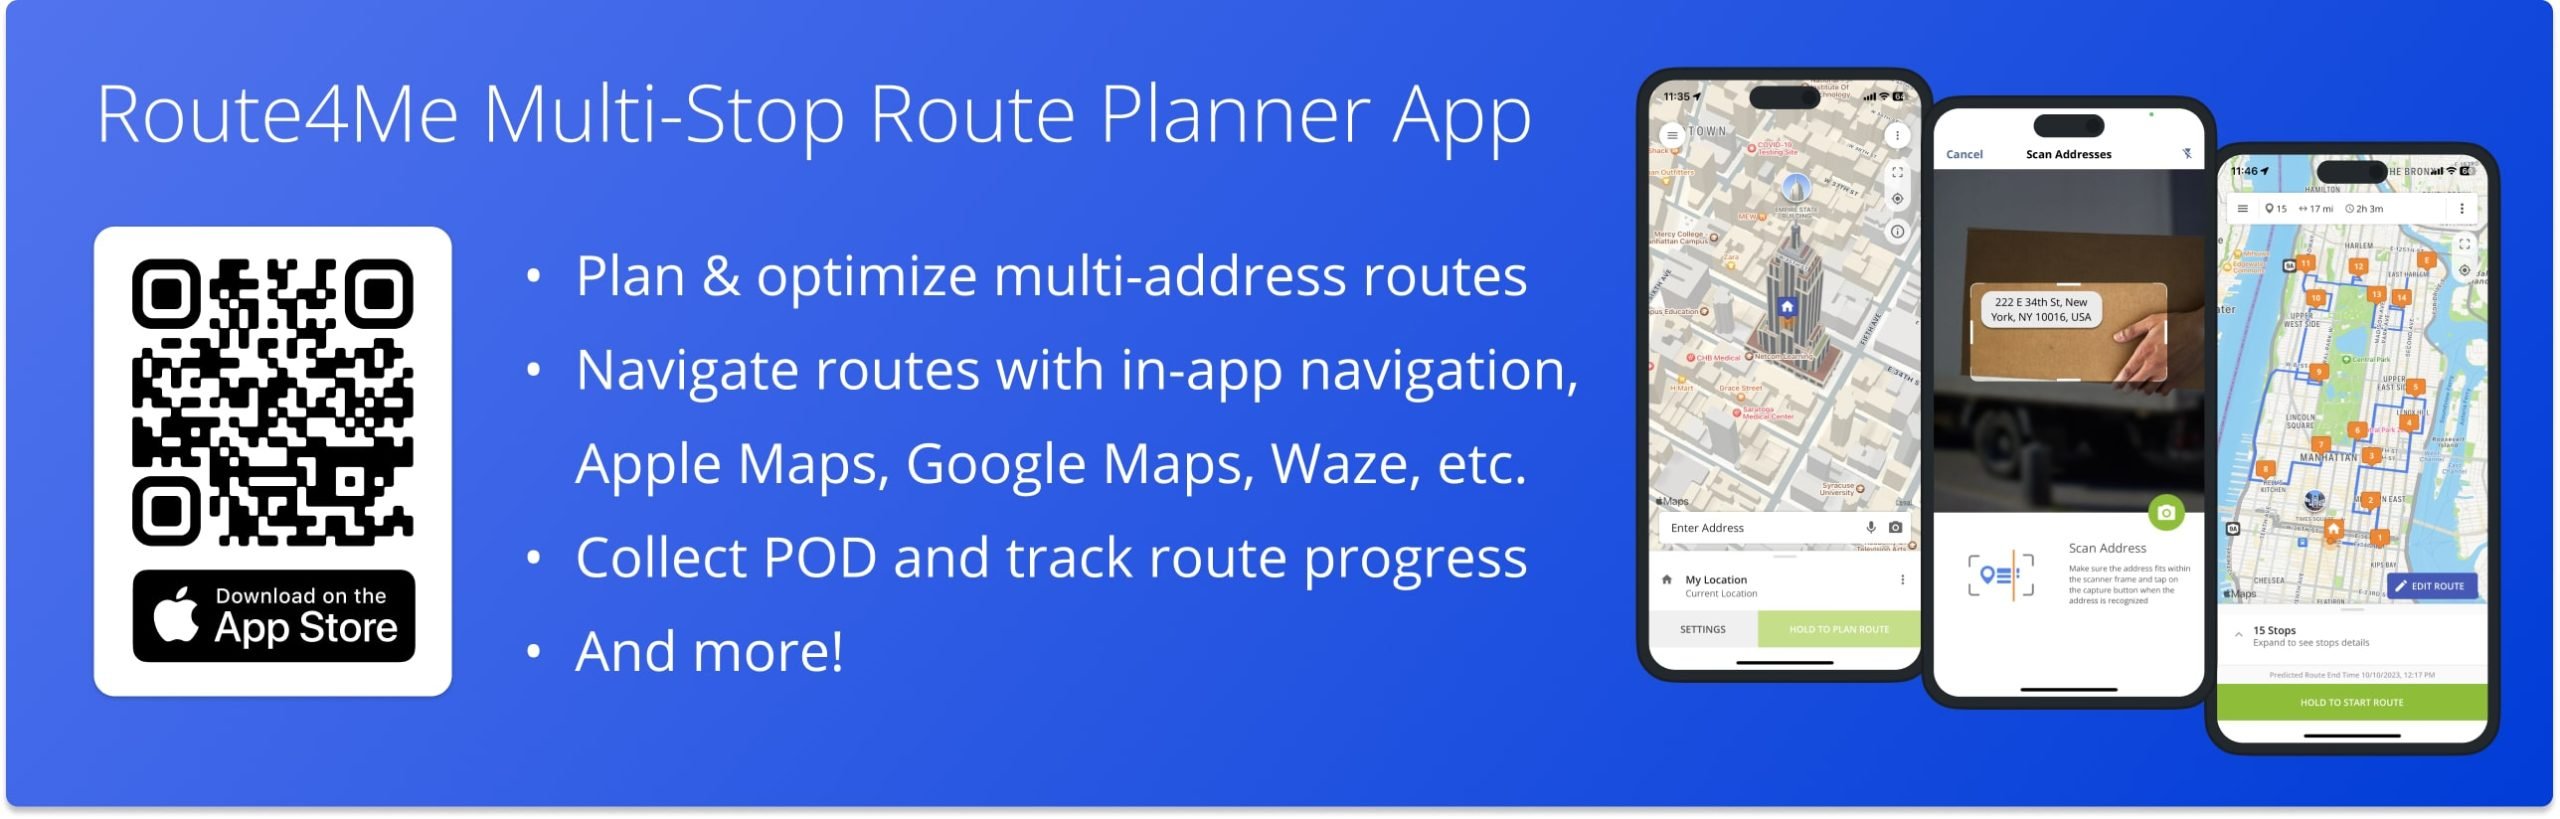 Download Route4Me multi-stop route planner app with in-app route navigation. Collect proof of delivery, proof of service, proof of visit.